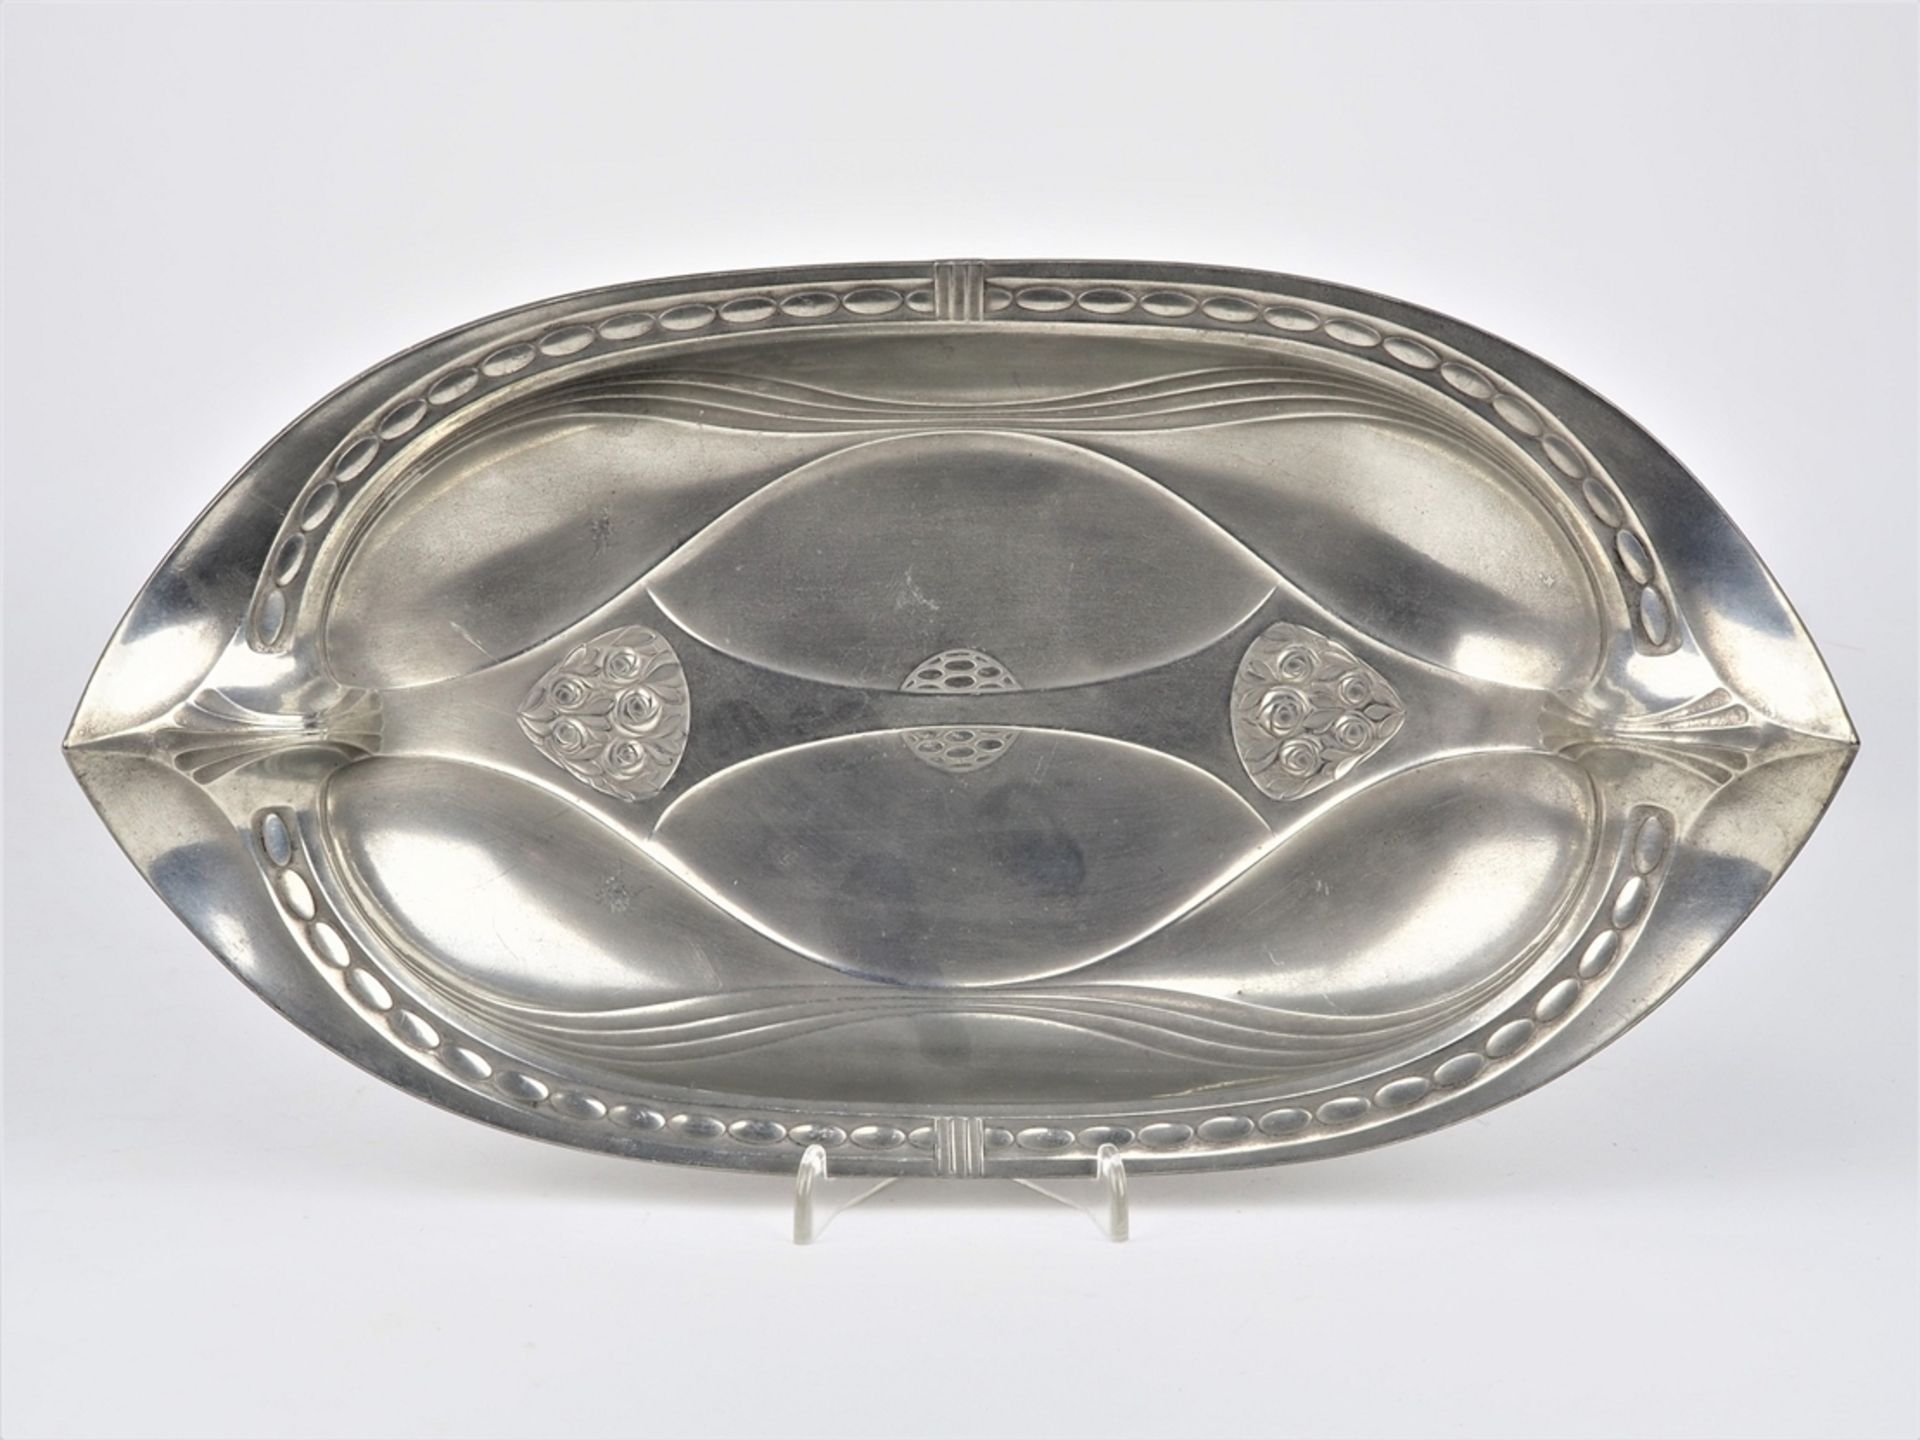 Oval pastry bowl around 1920